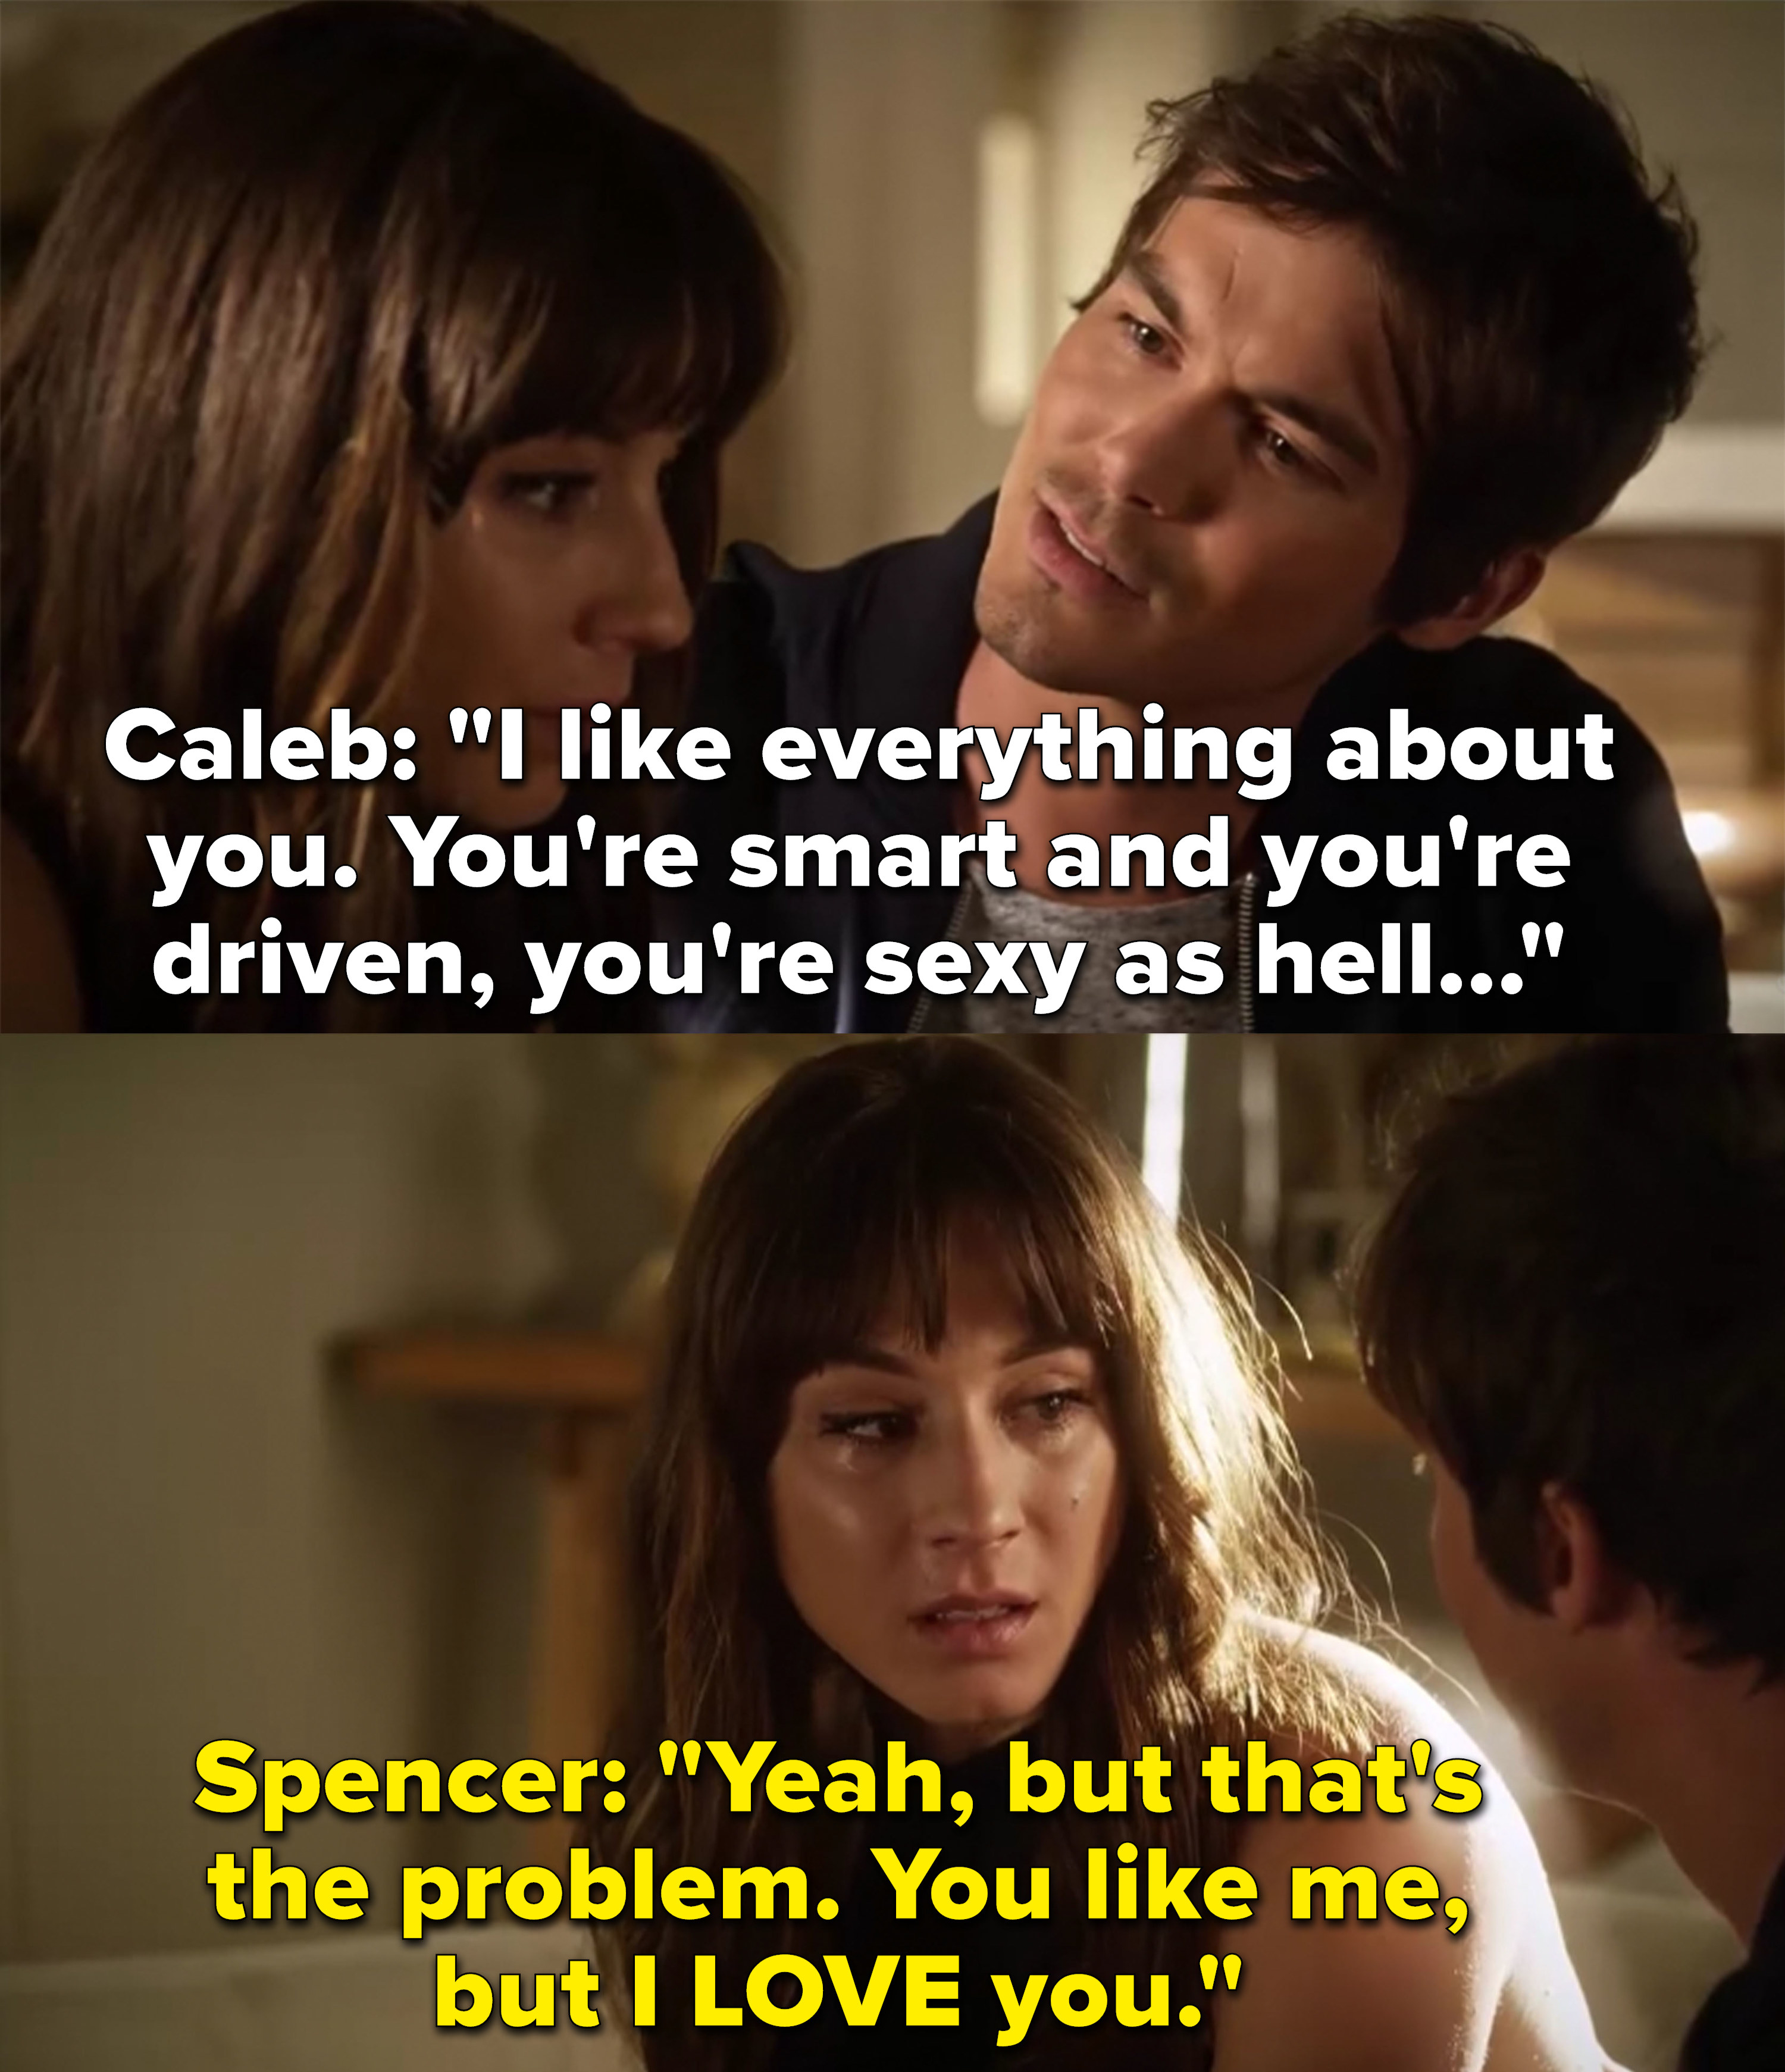 Spencer says the problem is that Caleb just likes her while she actually loves him